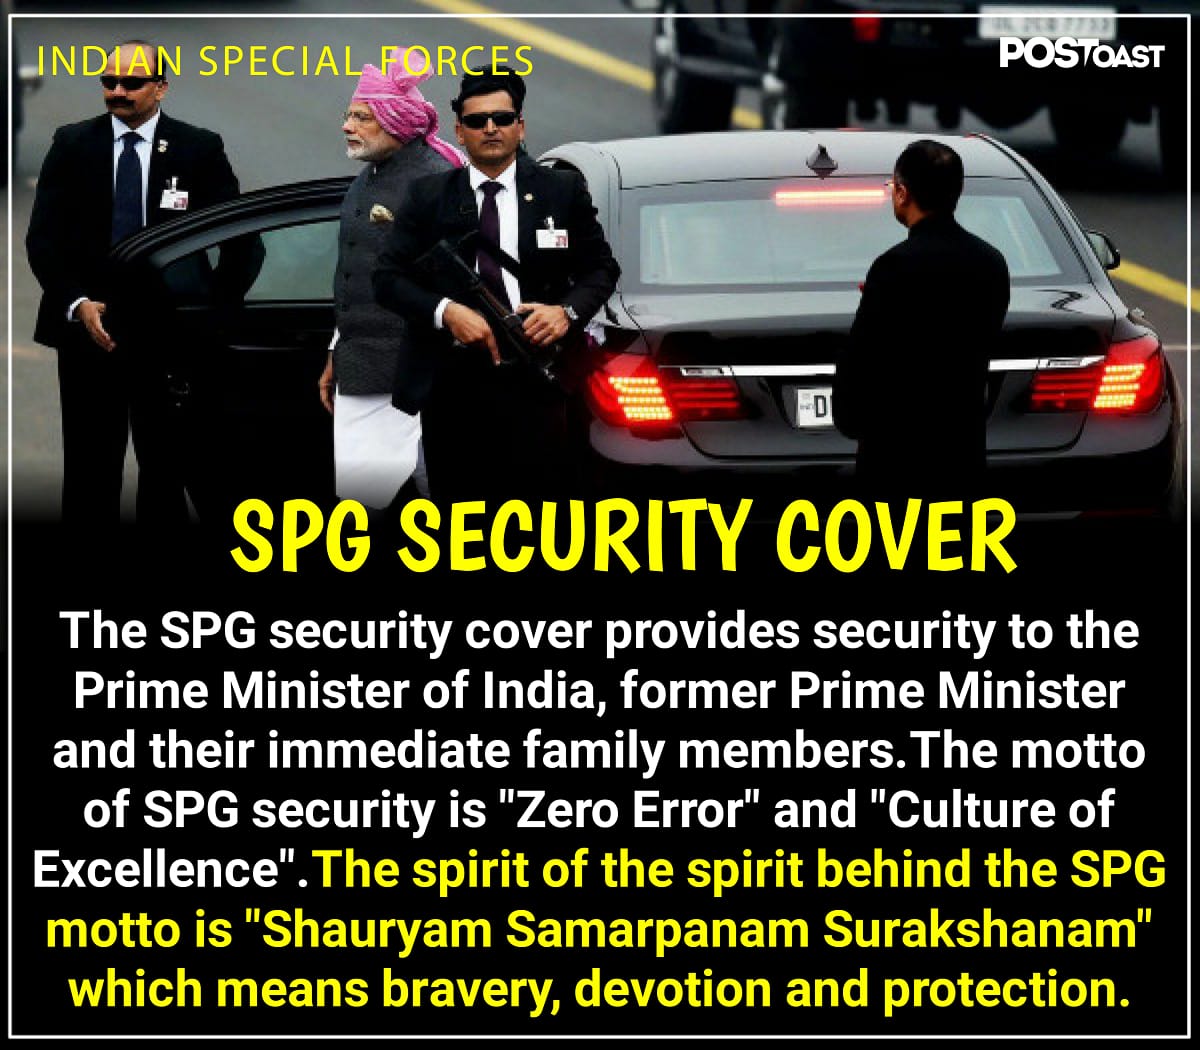 SPG The Special Protection Group